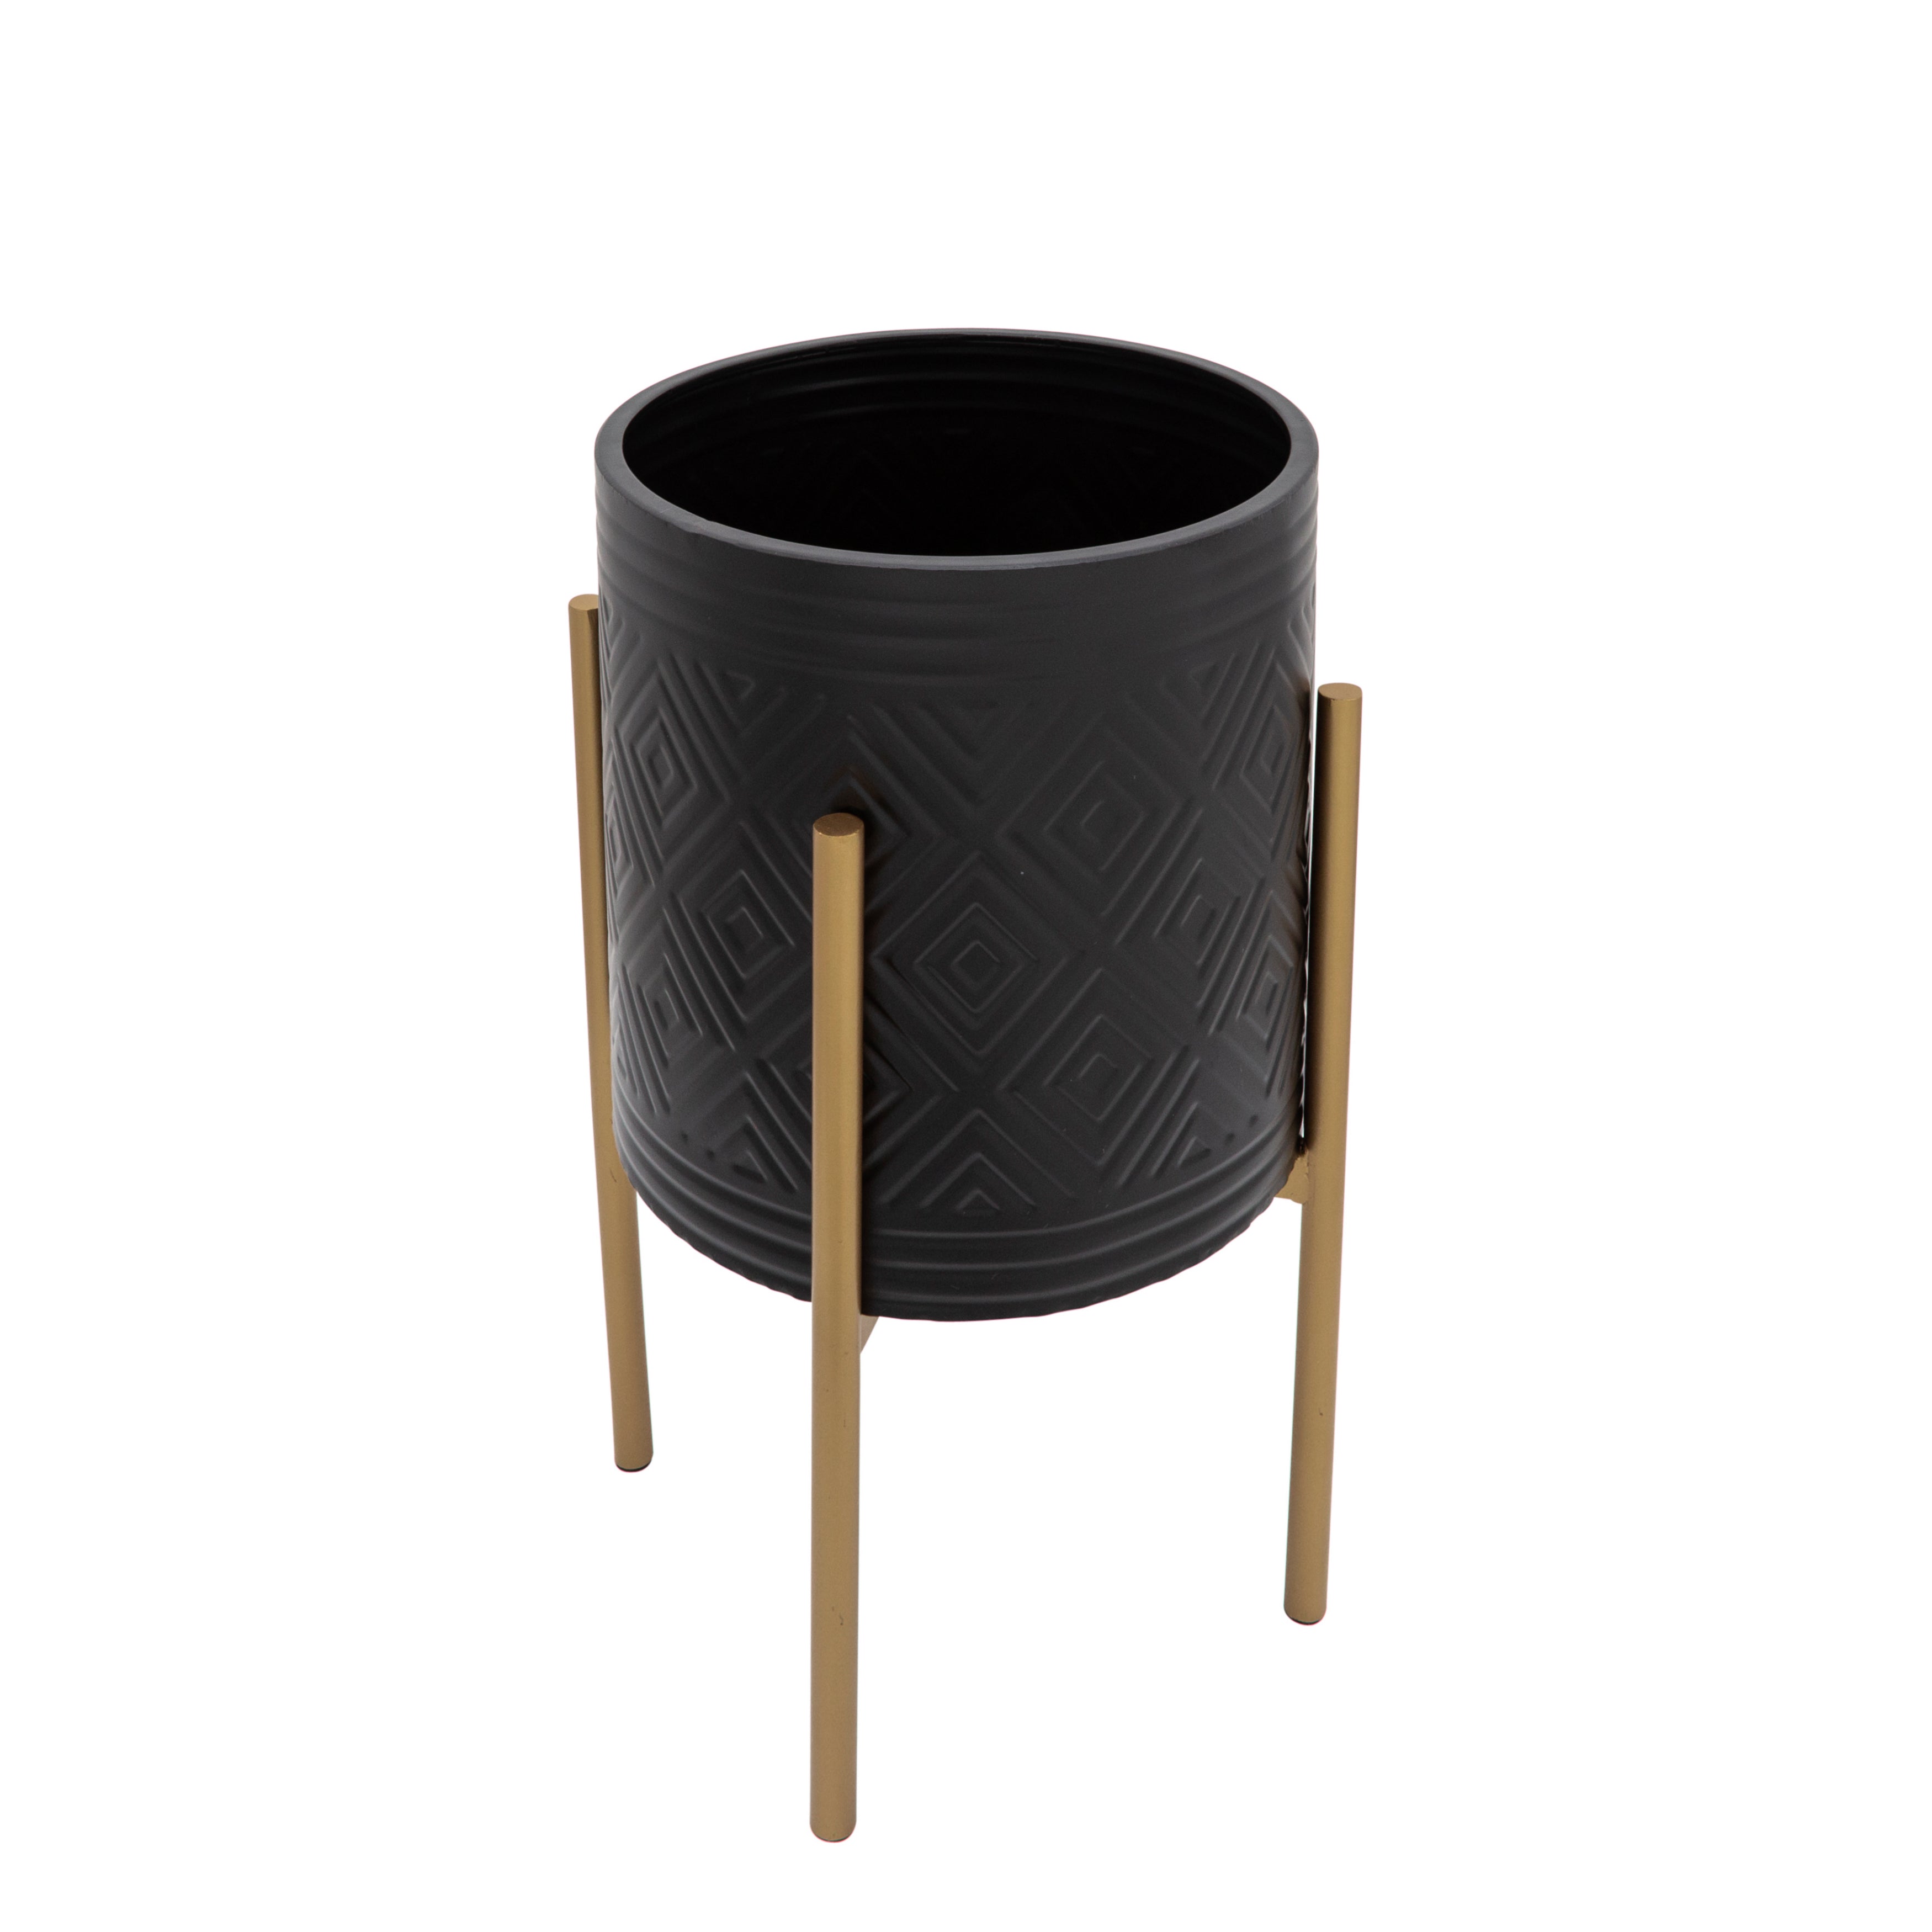 Set of 2 Aztec Planters On Stand, Black/Gold, Planters